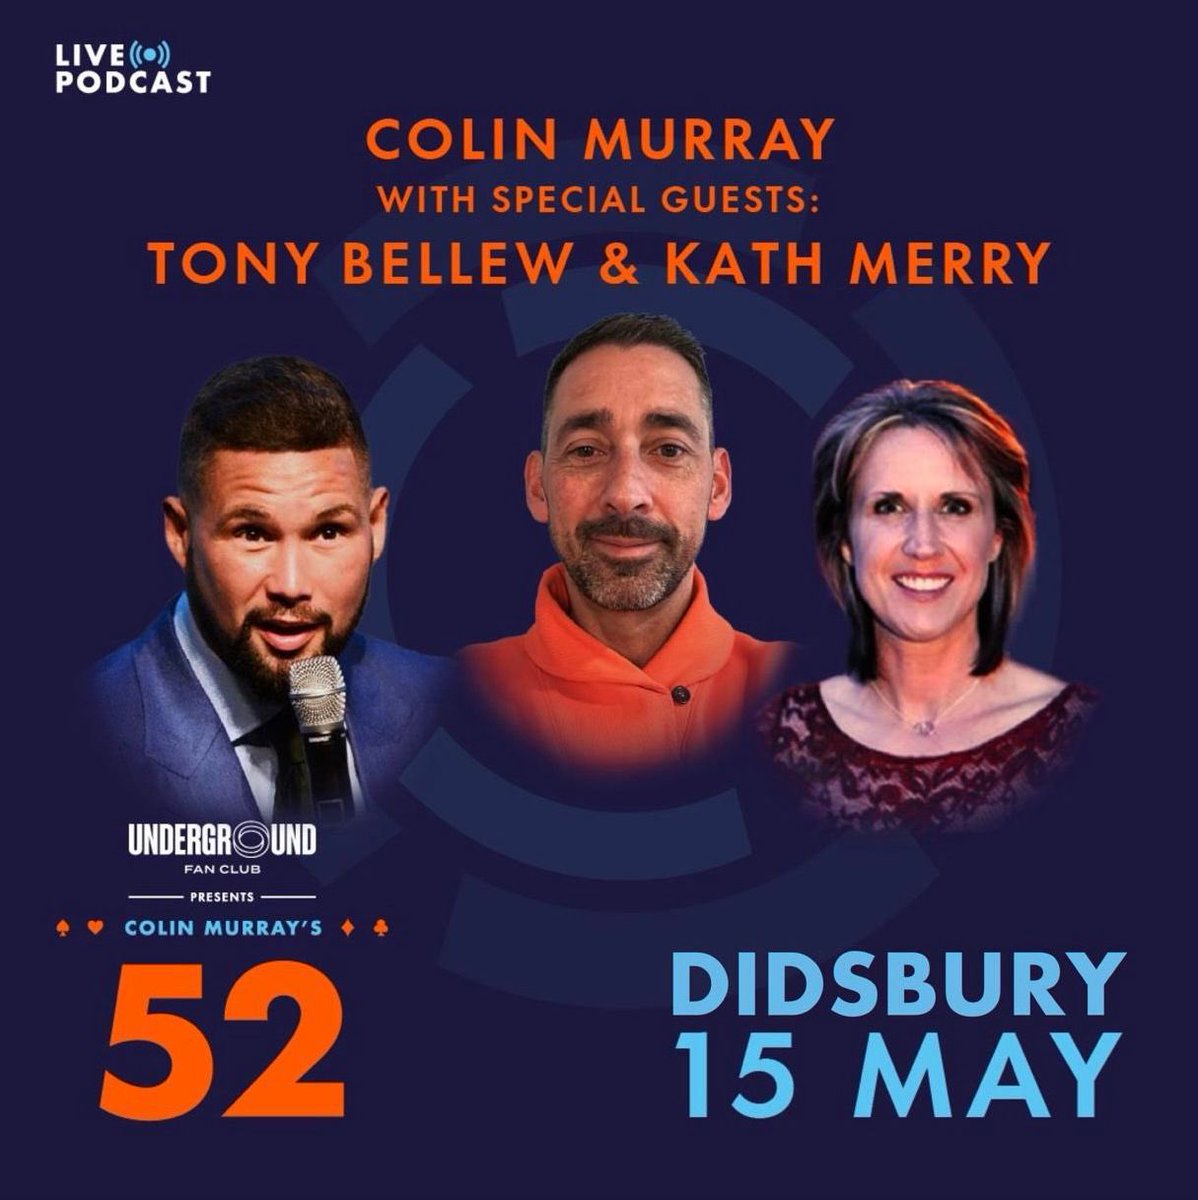 Looking forward to #ColinMurrays52 podcast with @colinmurray & @theufanclub, sponsored by @grosvenorcasino Join myself & @KatharineMerry live from Manchester Didsbury -15 May Tickets available here- bit.ly/3WbjrJW 18+ BeGambleAware.org DrinkAware.co.uk